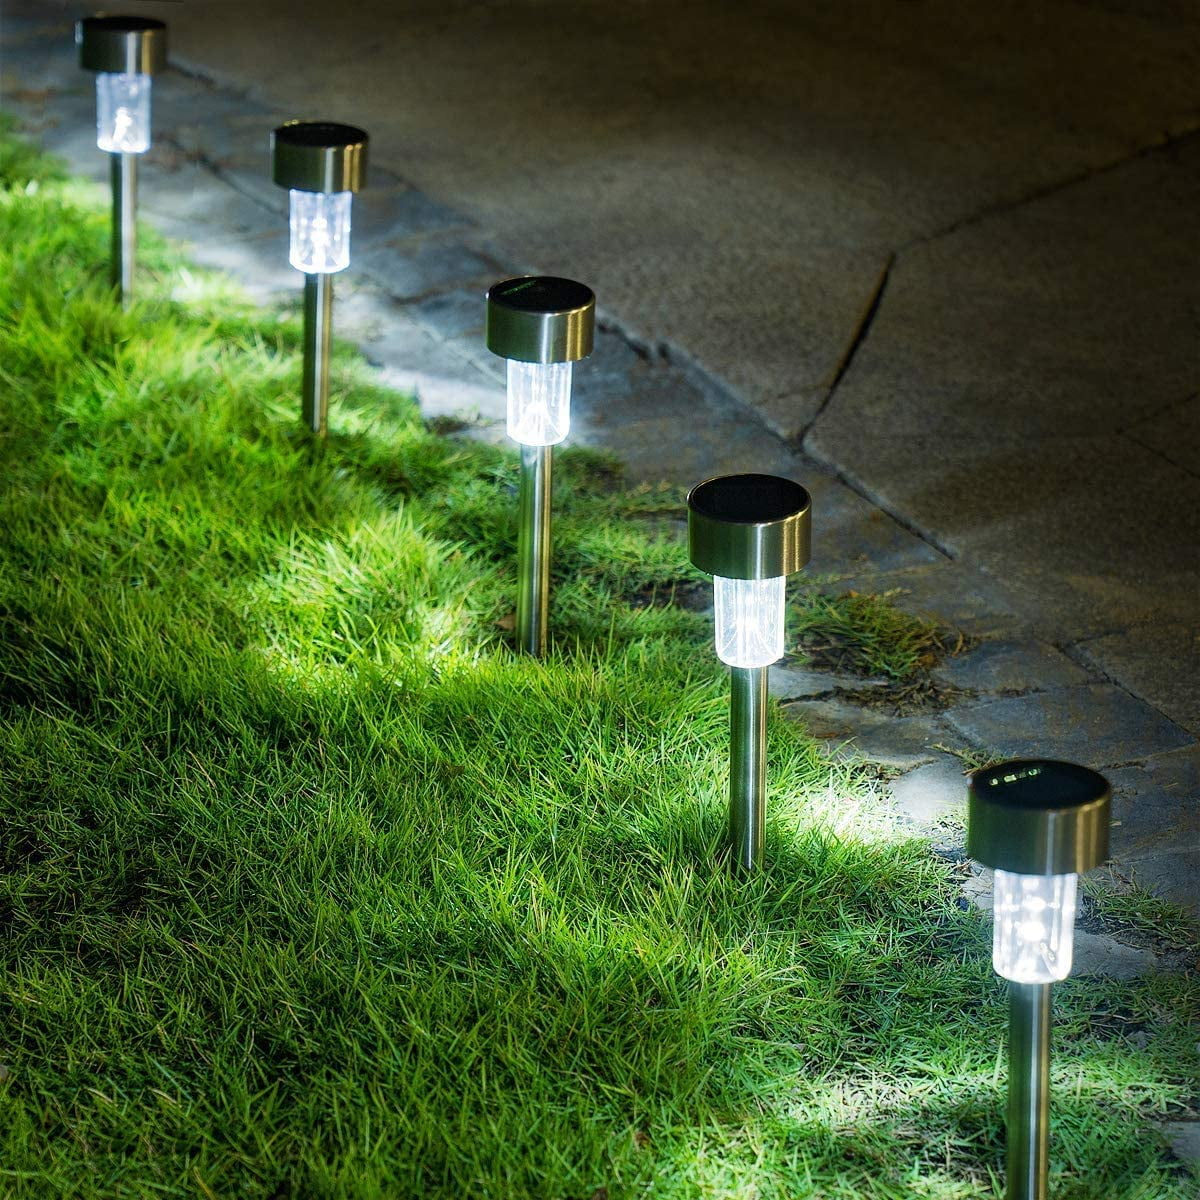 10x Solar Power LED Stake Lights Patio Outdoor Garden Lawn Path Lamp HOT 